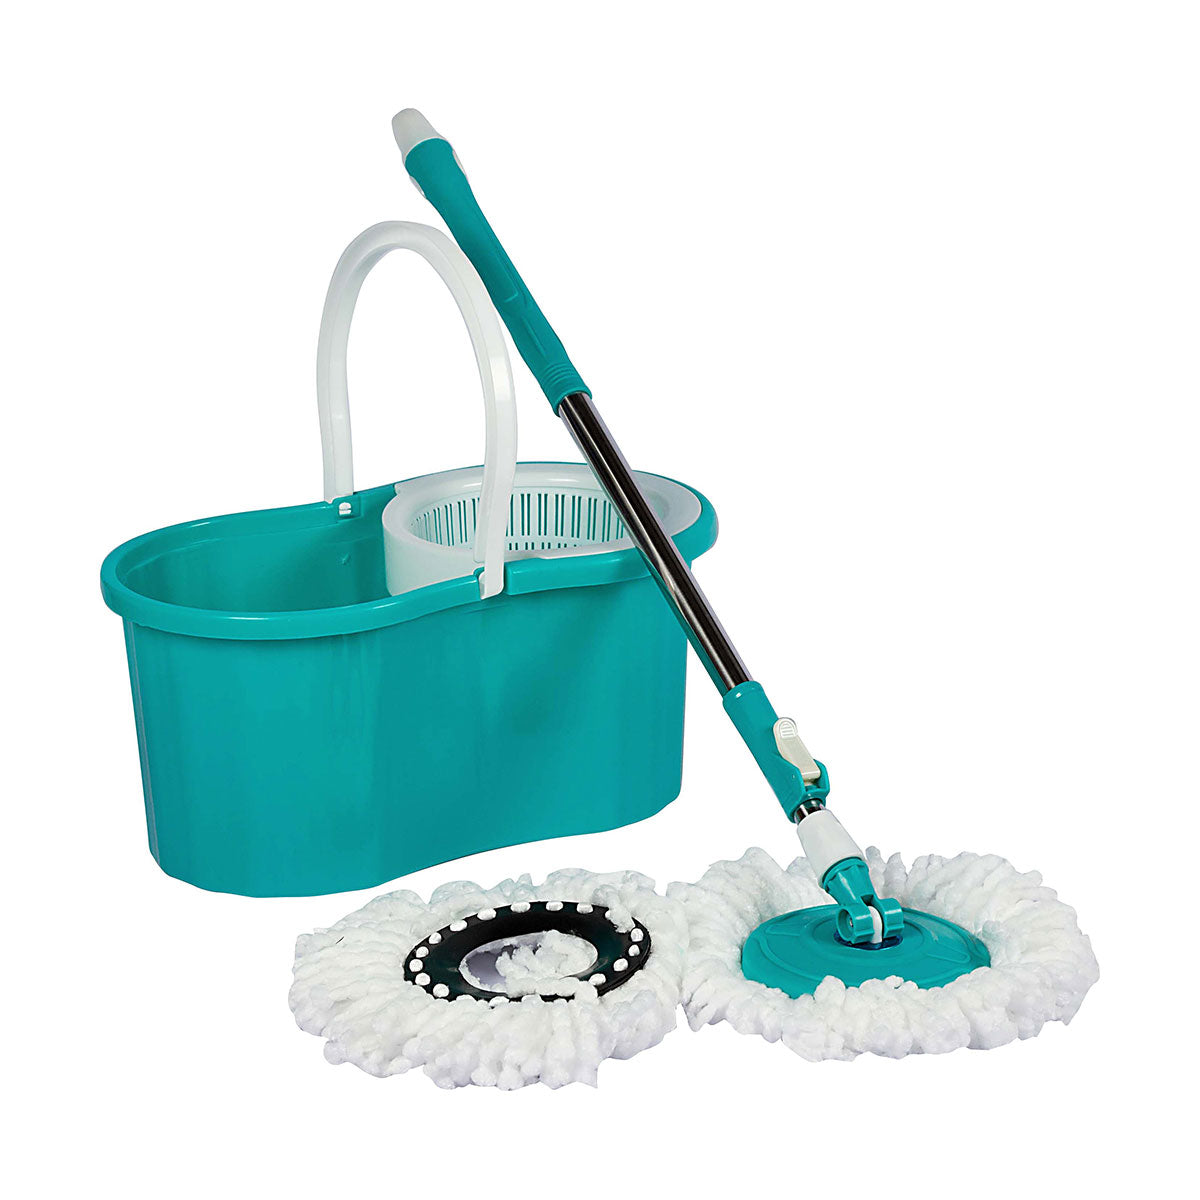 Spin Mop Bucket with Plastic Contour Buzz